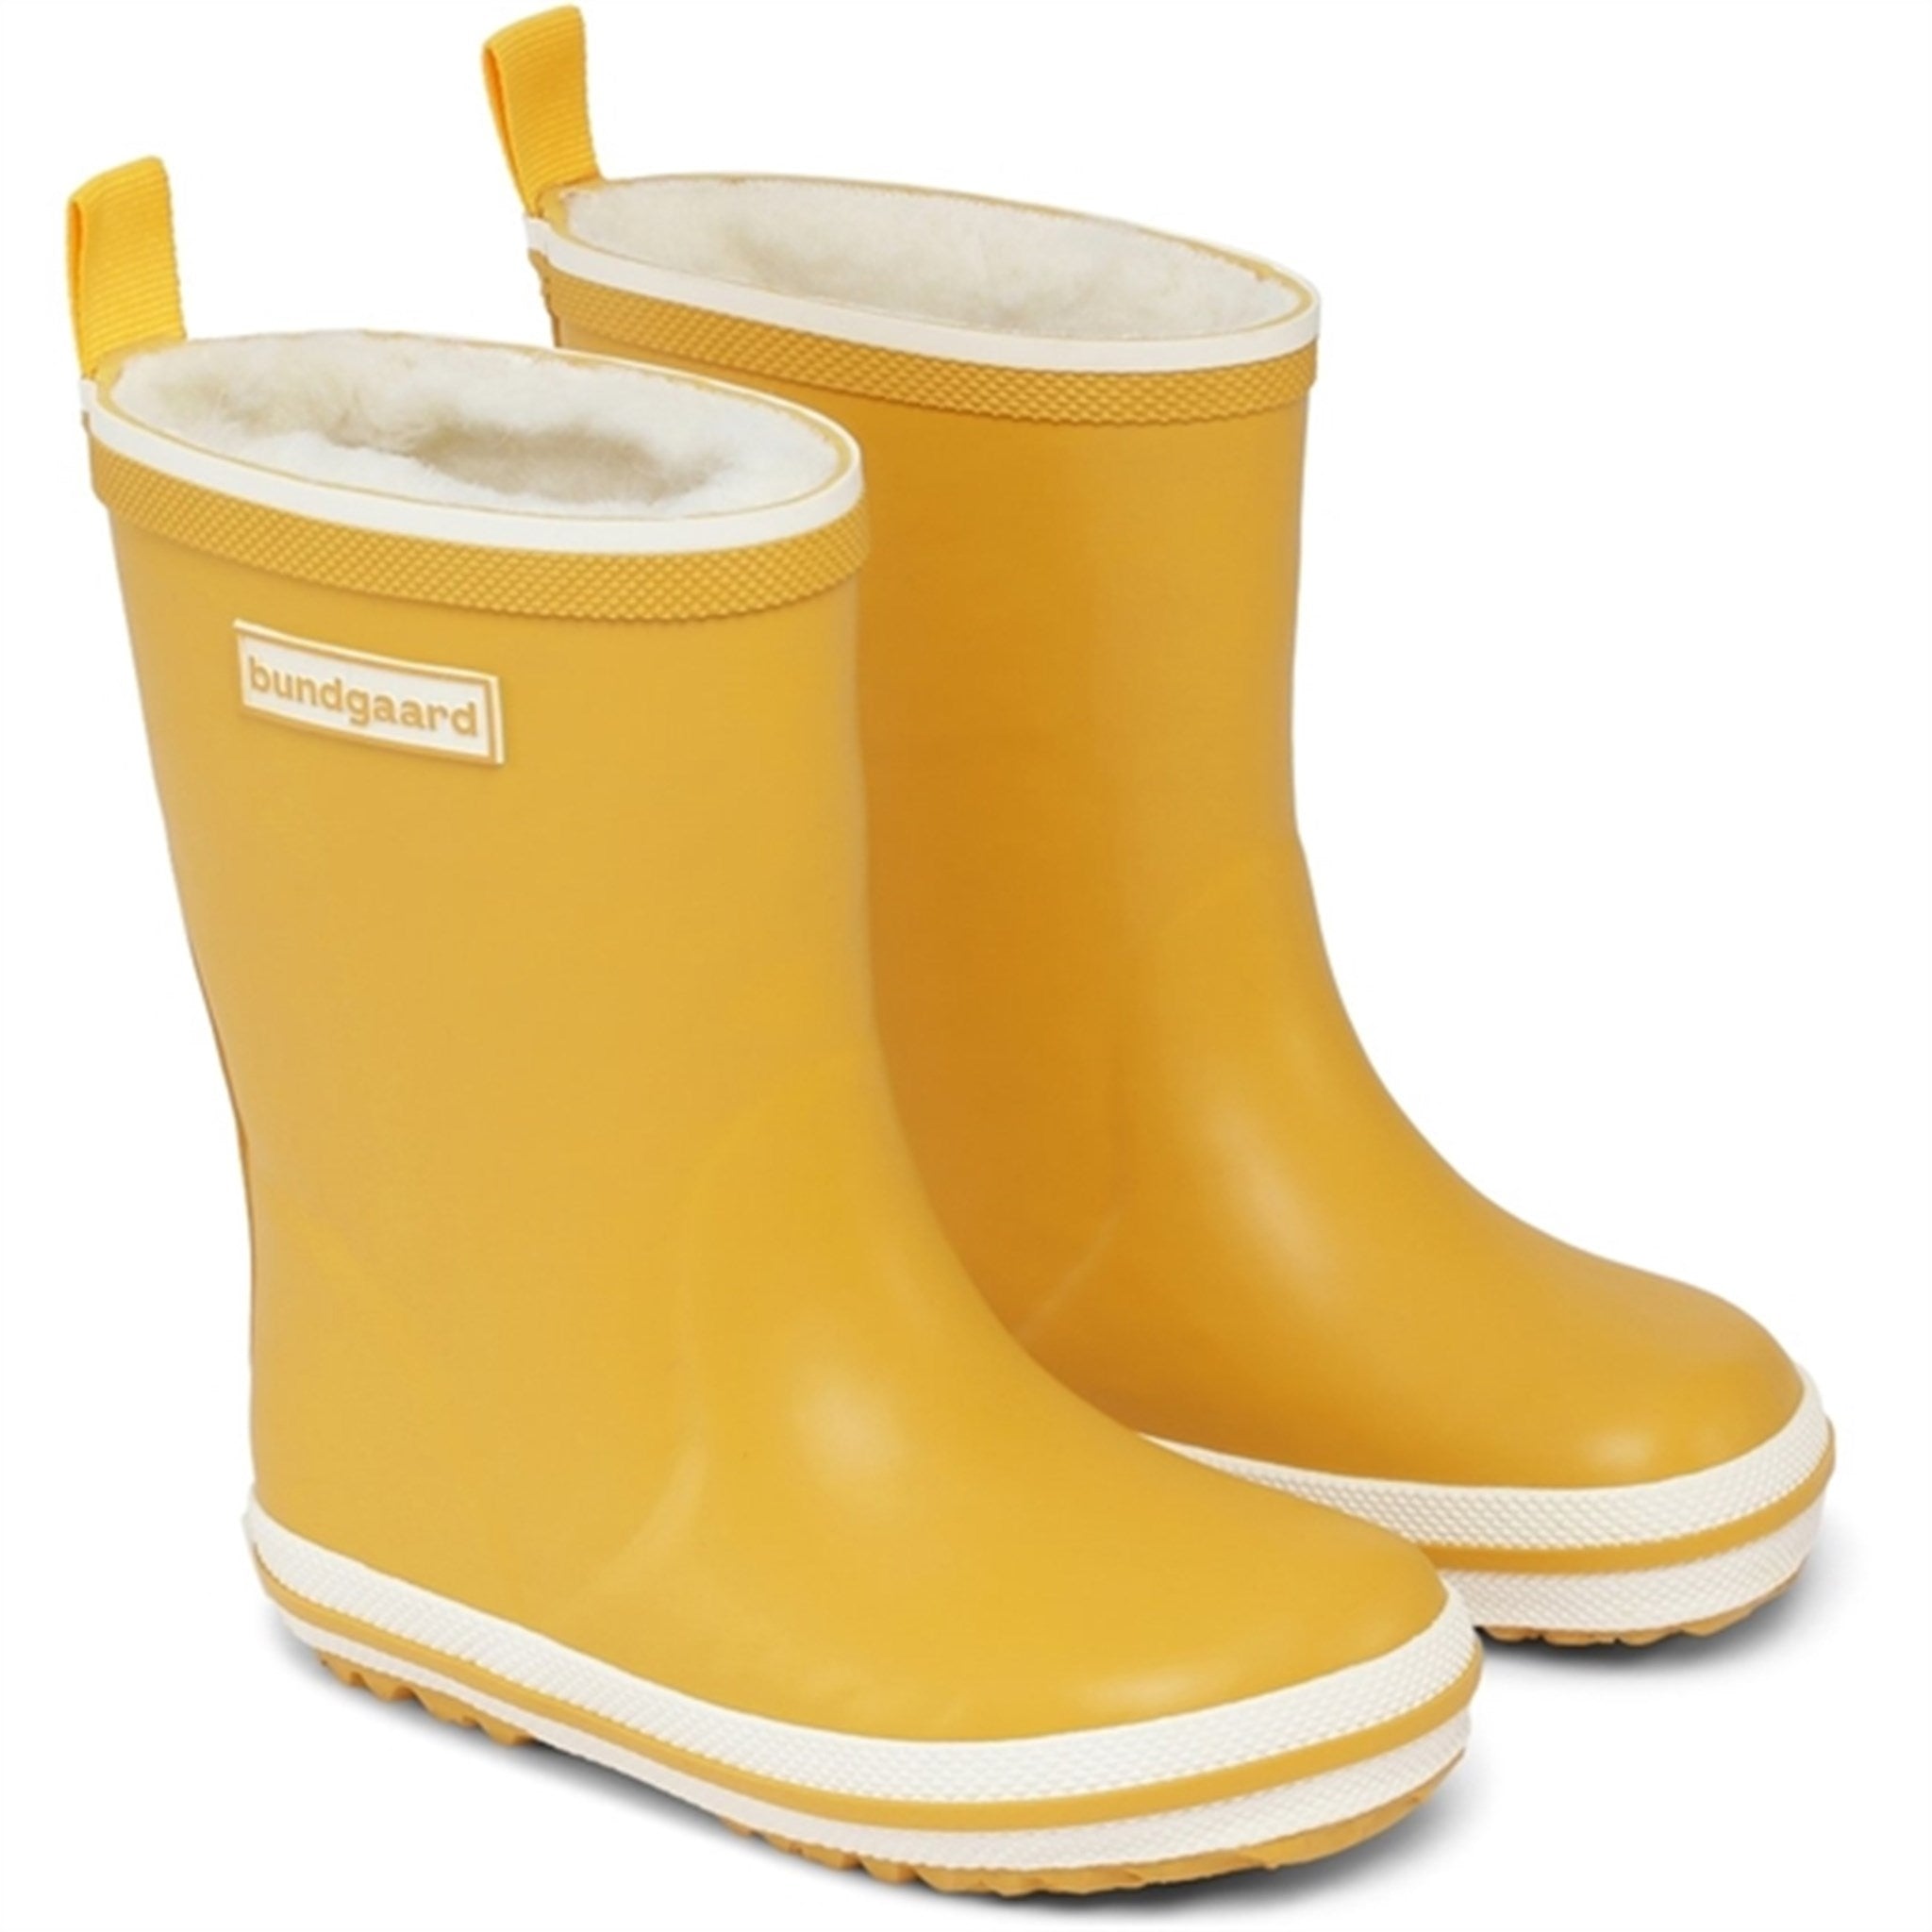 Bundgaard Charly High Warm Rubber Boot Curry